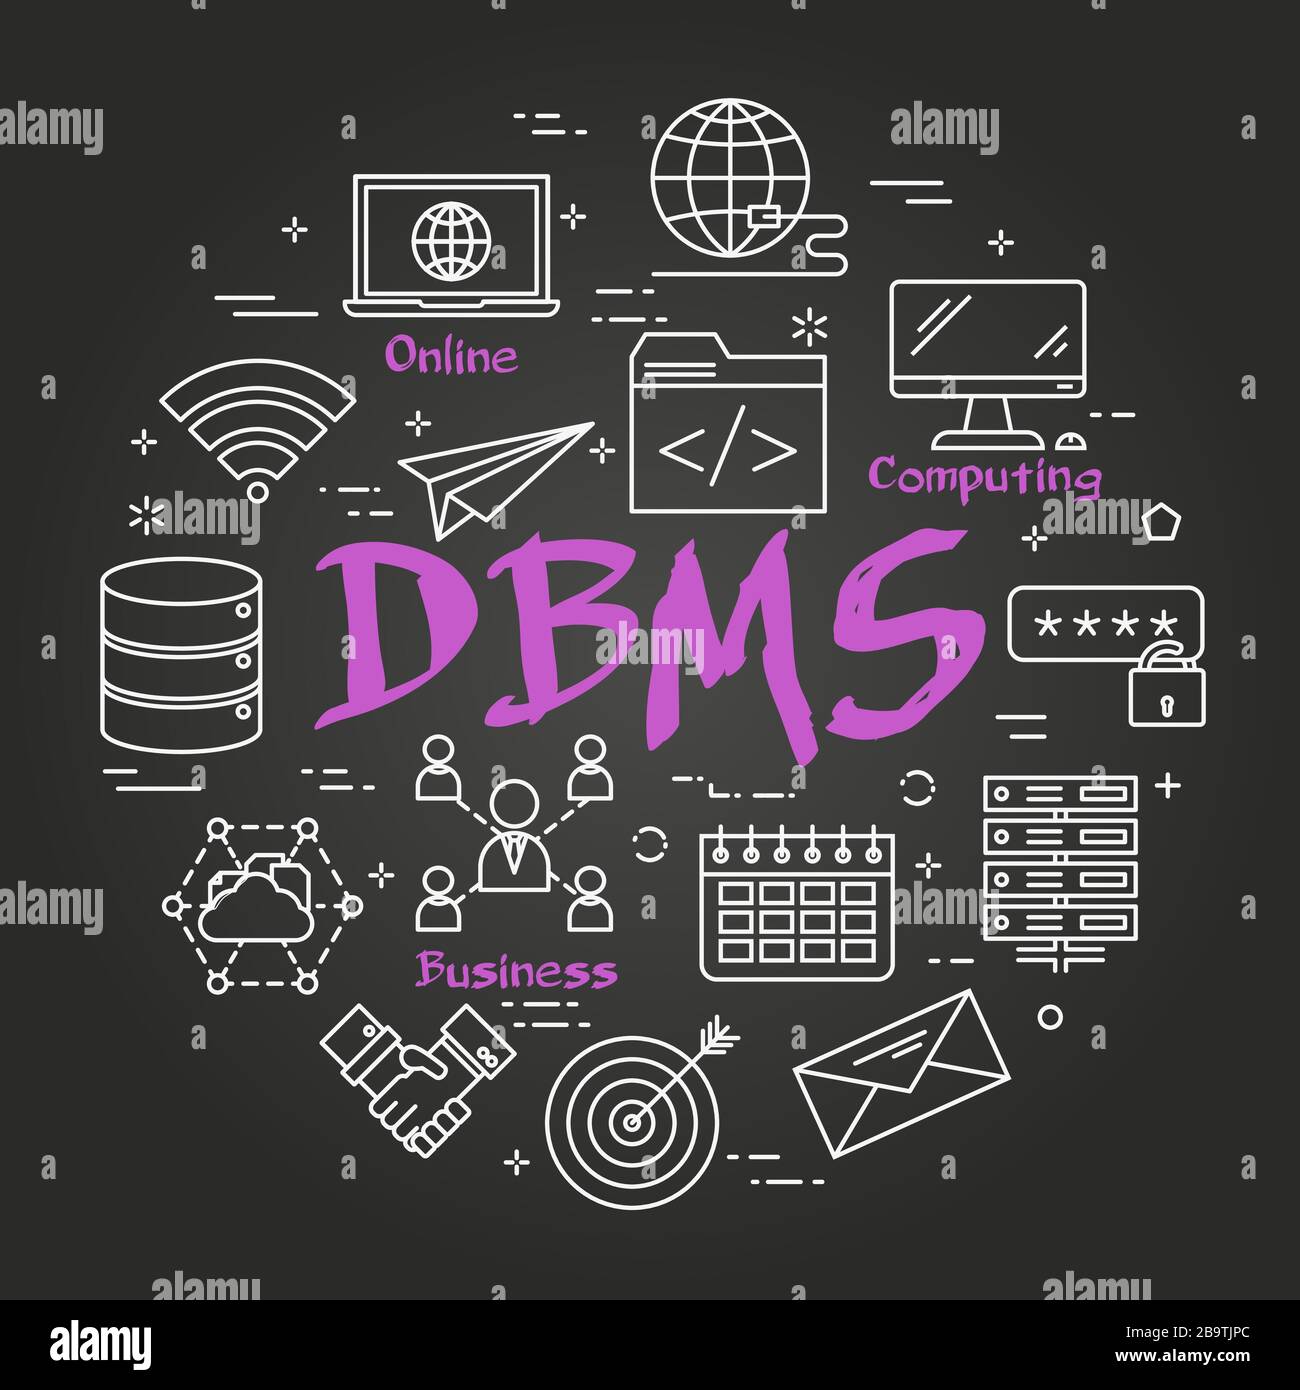 Essential Components of Database | Building Blocks In DBMS